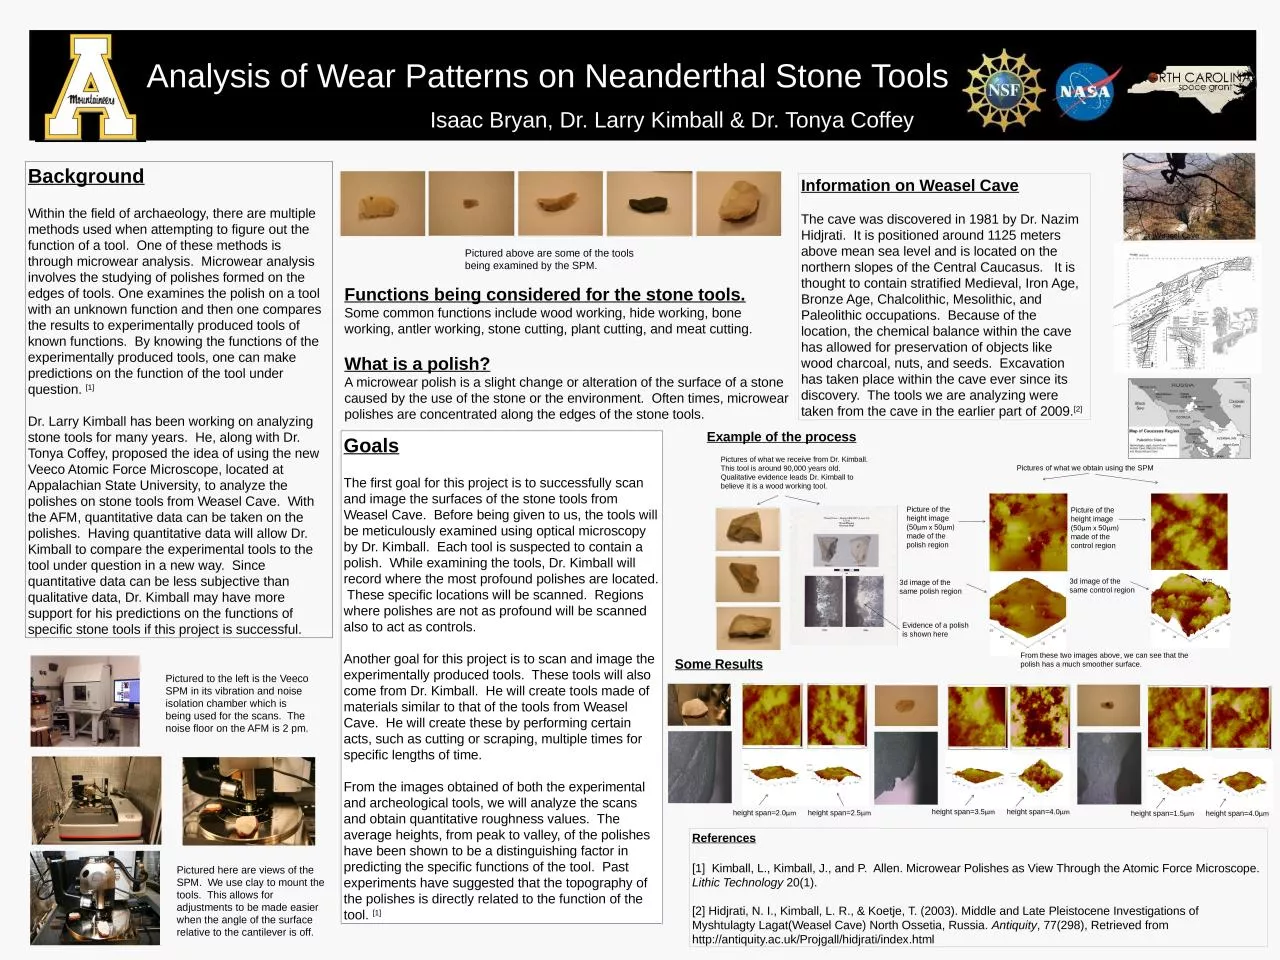 Analysis of Wear Patterns on Neanderthal Stone Tools